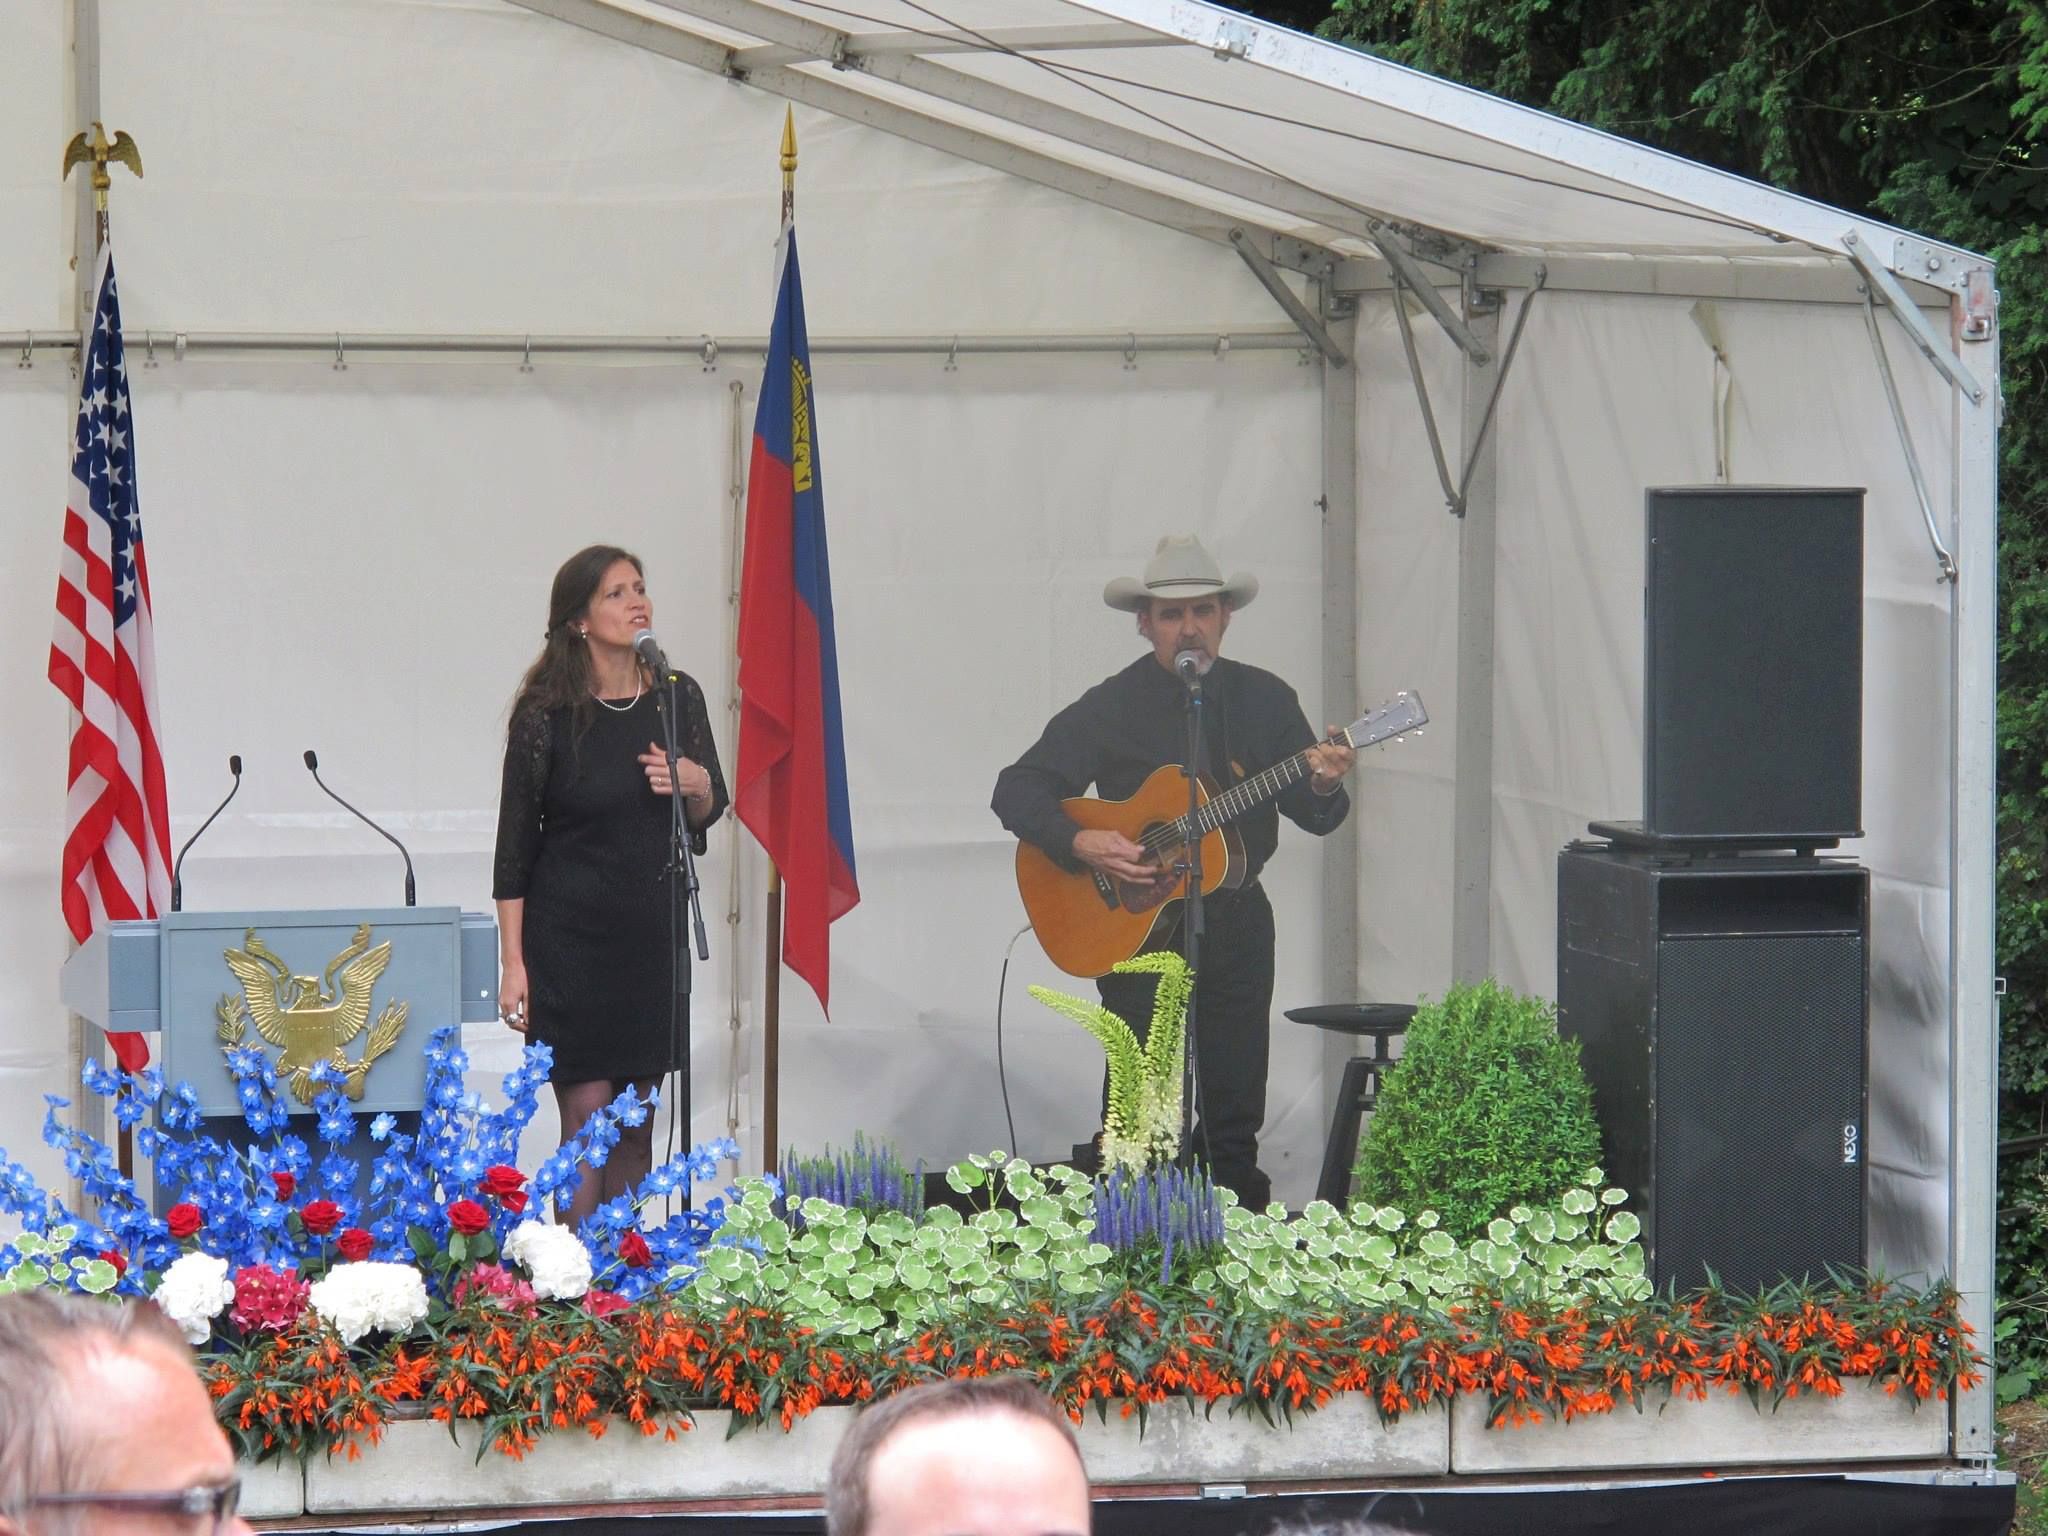 performing for the US Embassy